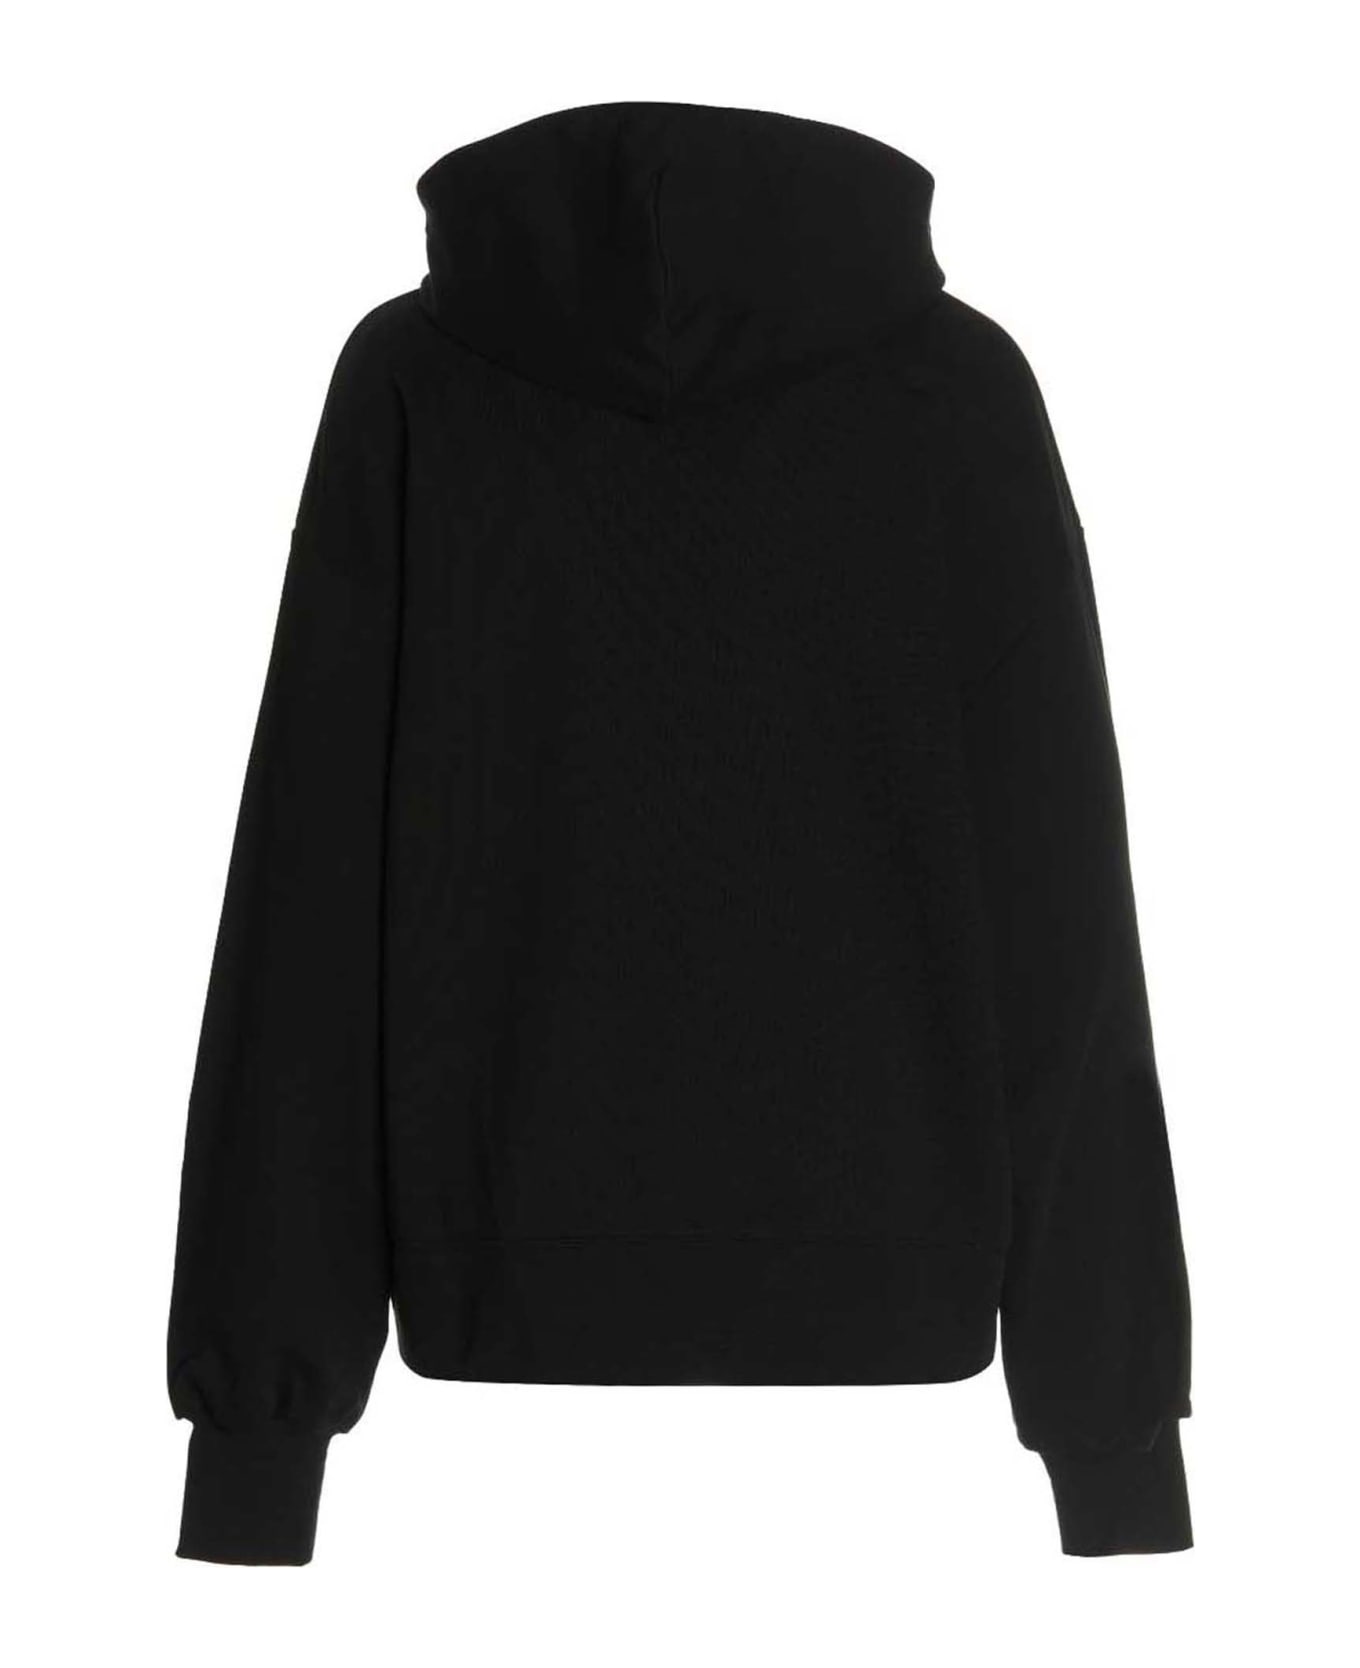 GCDS 'don't Care' Capsule Hoodie With 'don't Care' Capsule - Black  